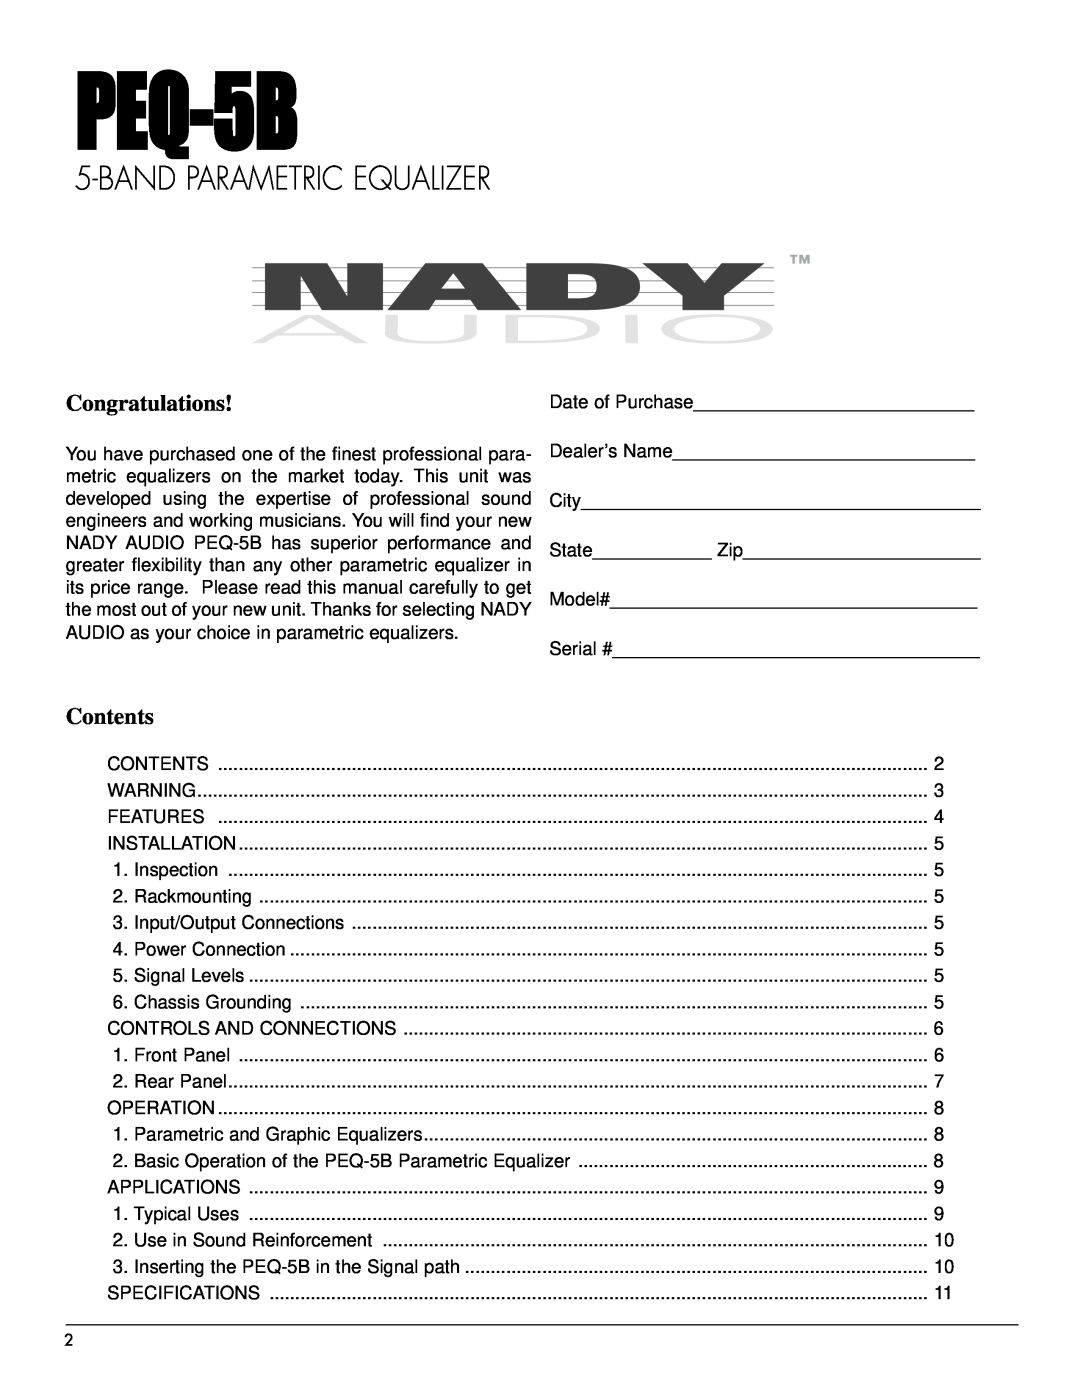 Nady Systems PEQ-5B Date of Purchase, Dealer’s Name, City, State Zip, Model#, Serial #, Bandparametric Equalizer, Contents 